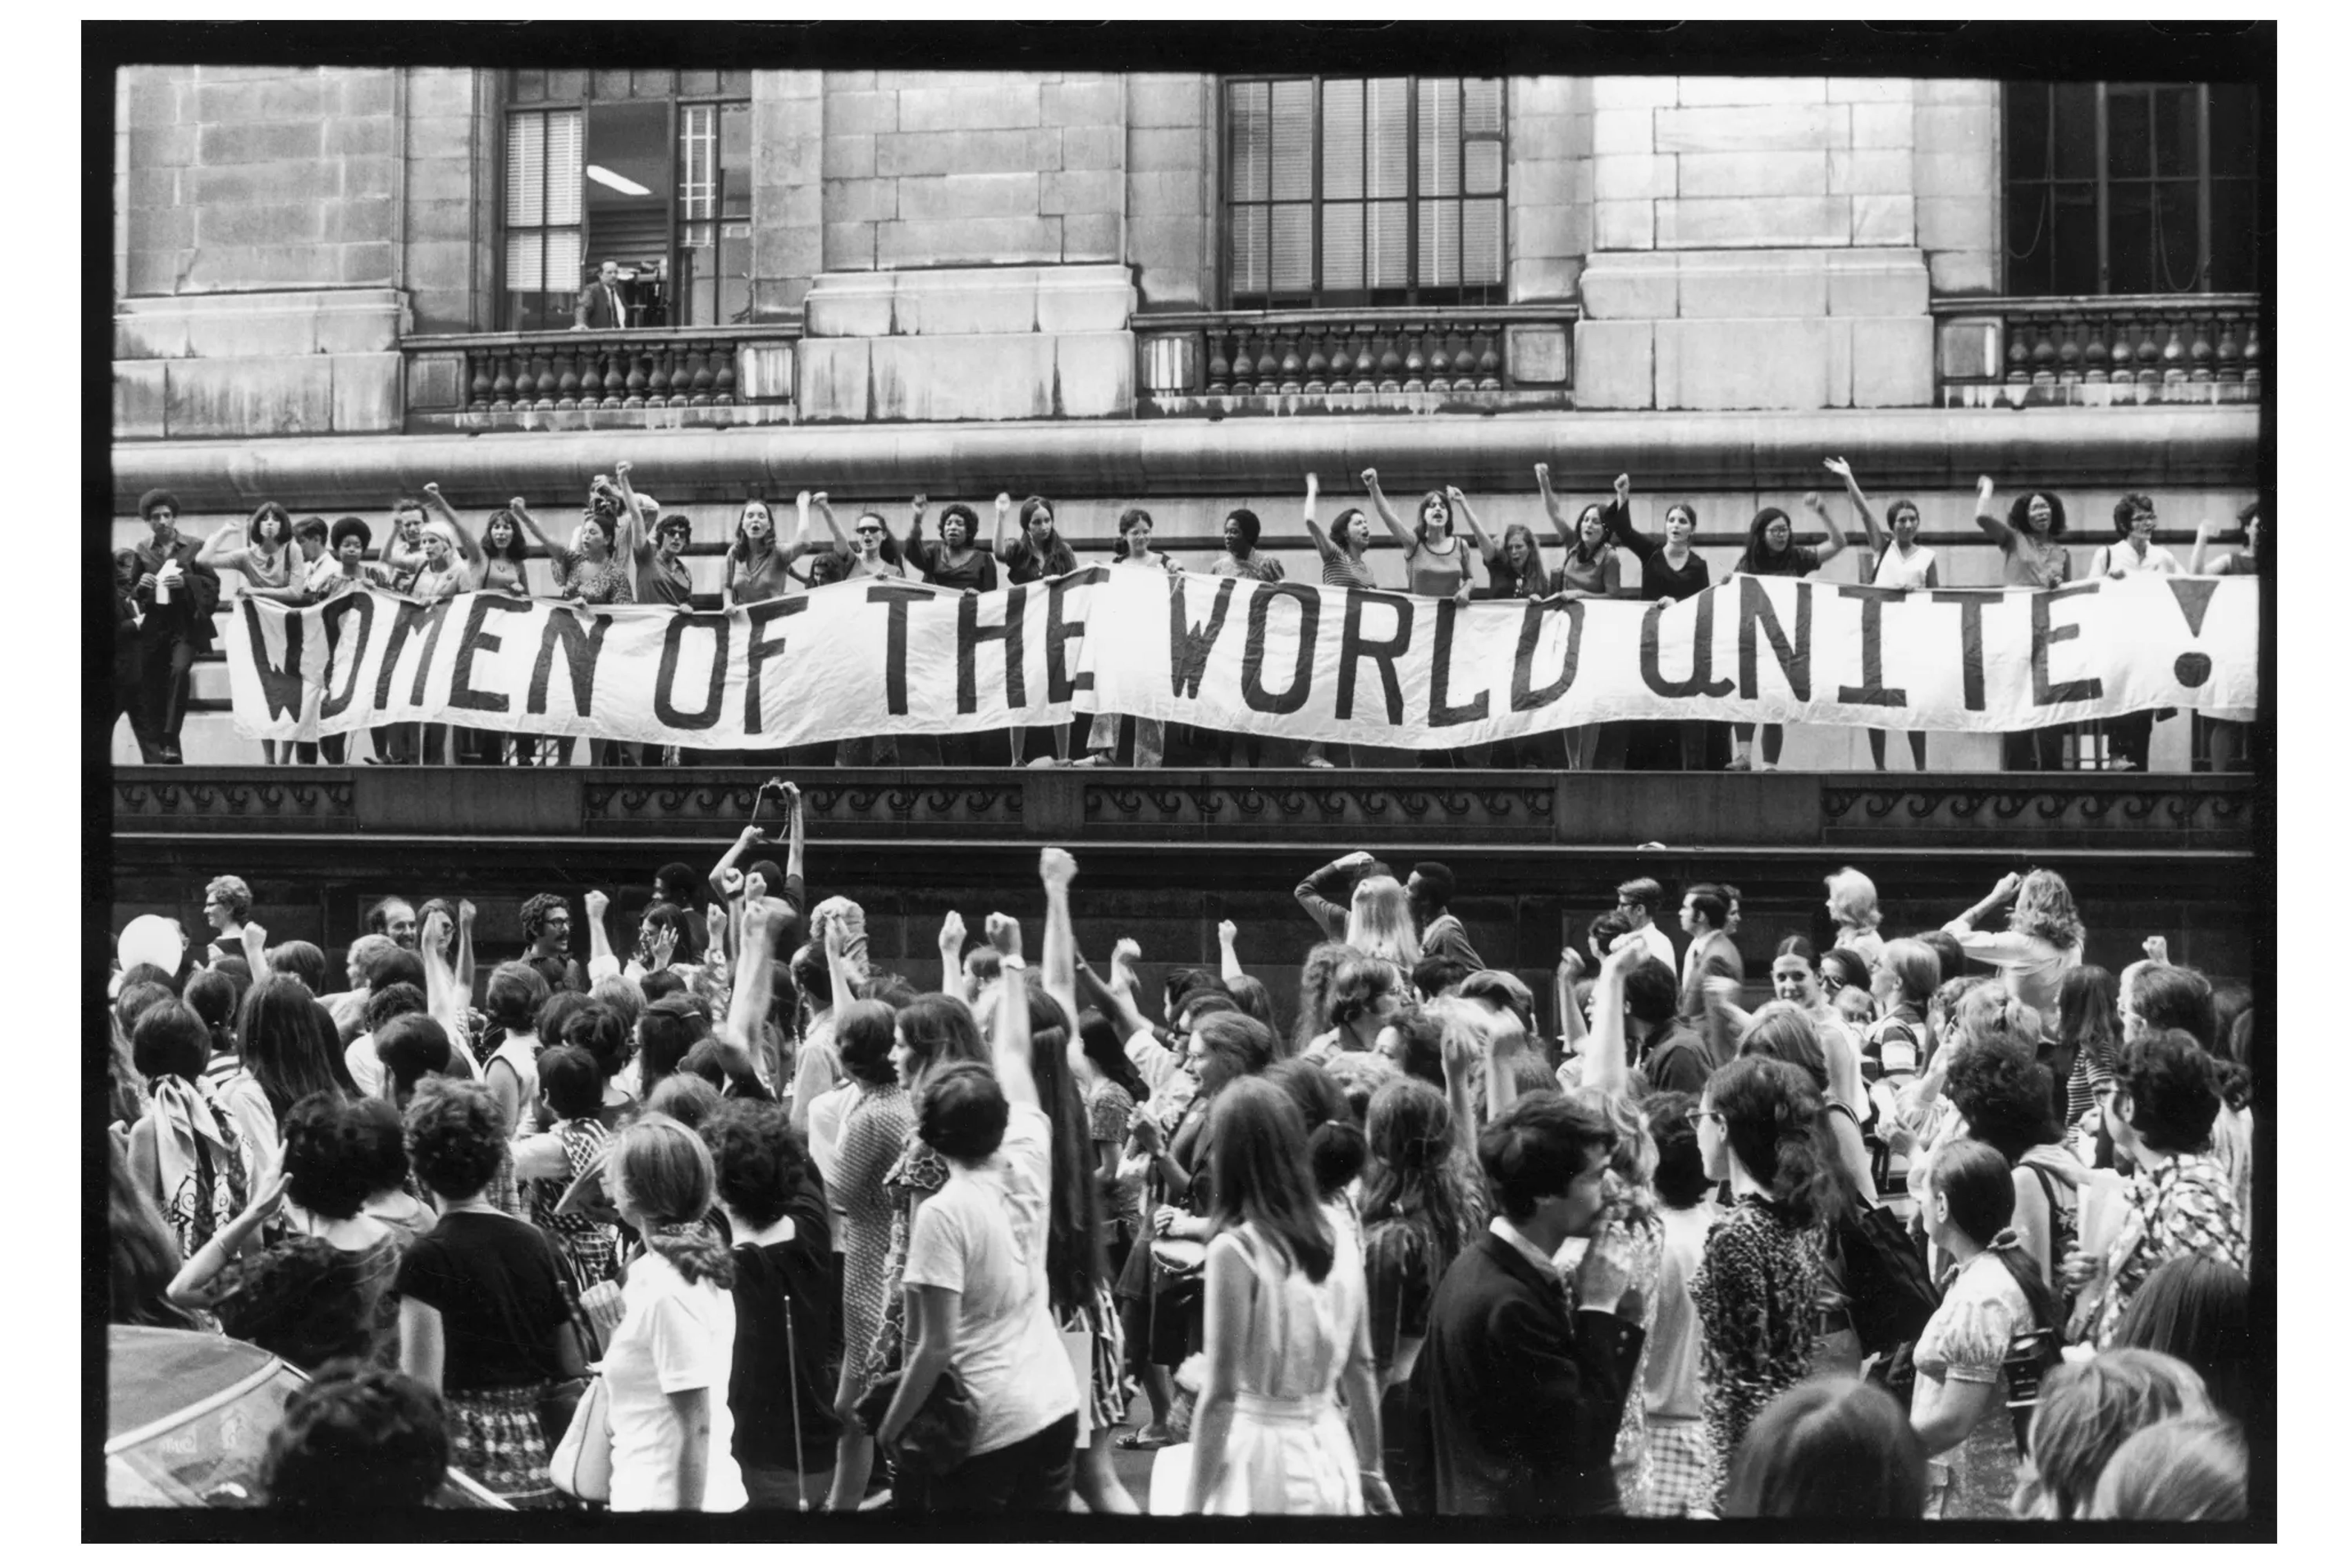 Women marching in 1970 to commemorate the 50th anniversary of Women’s Suffrage in the United States